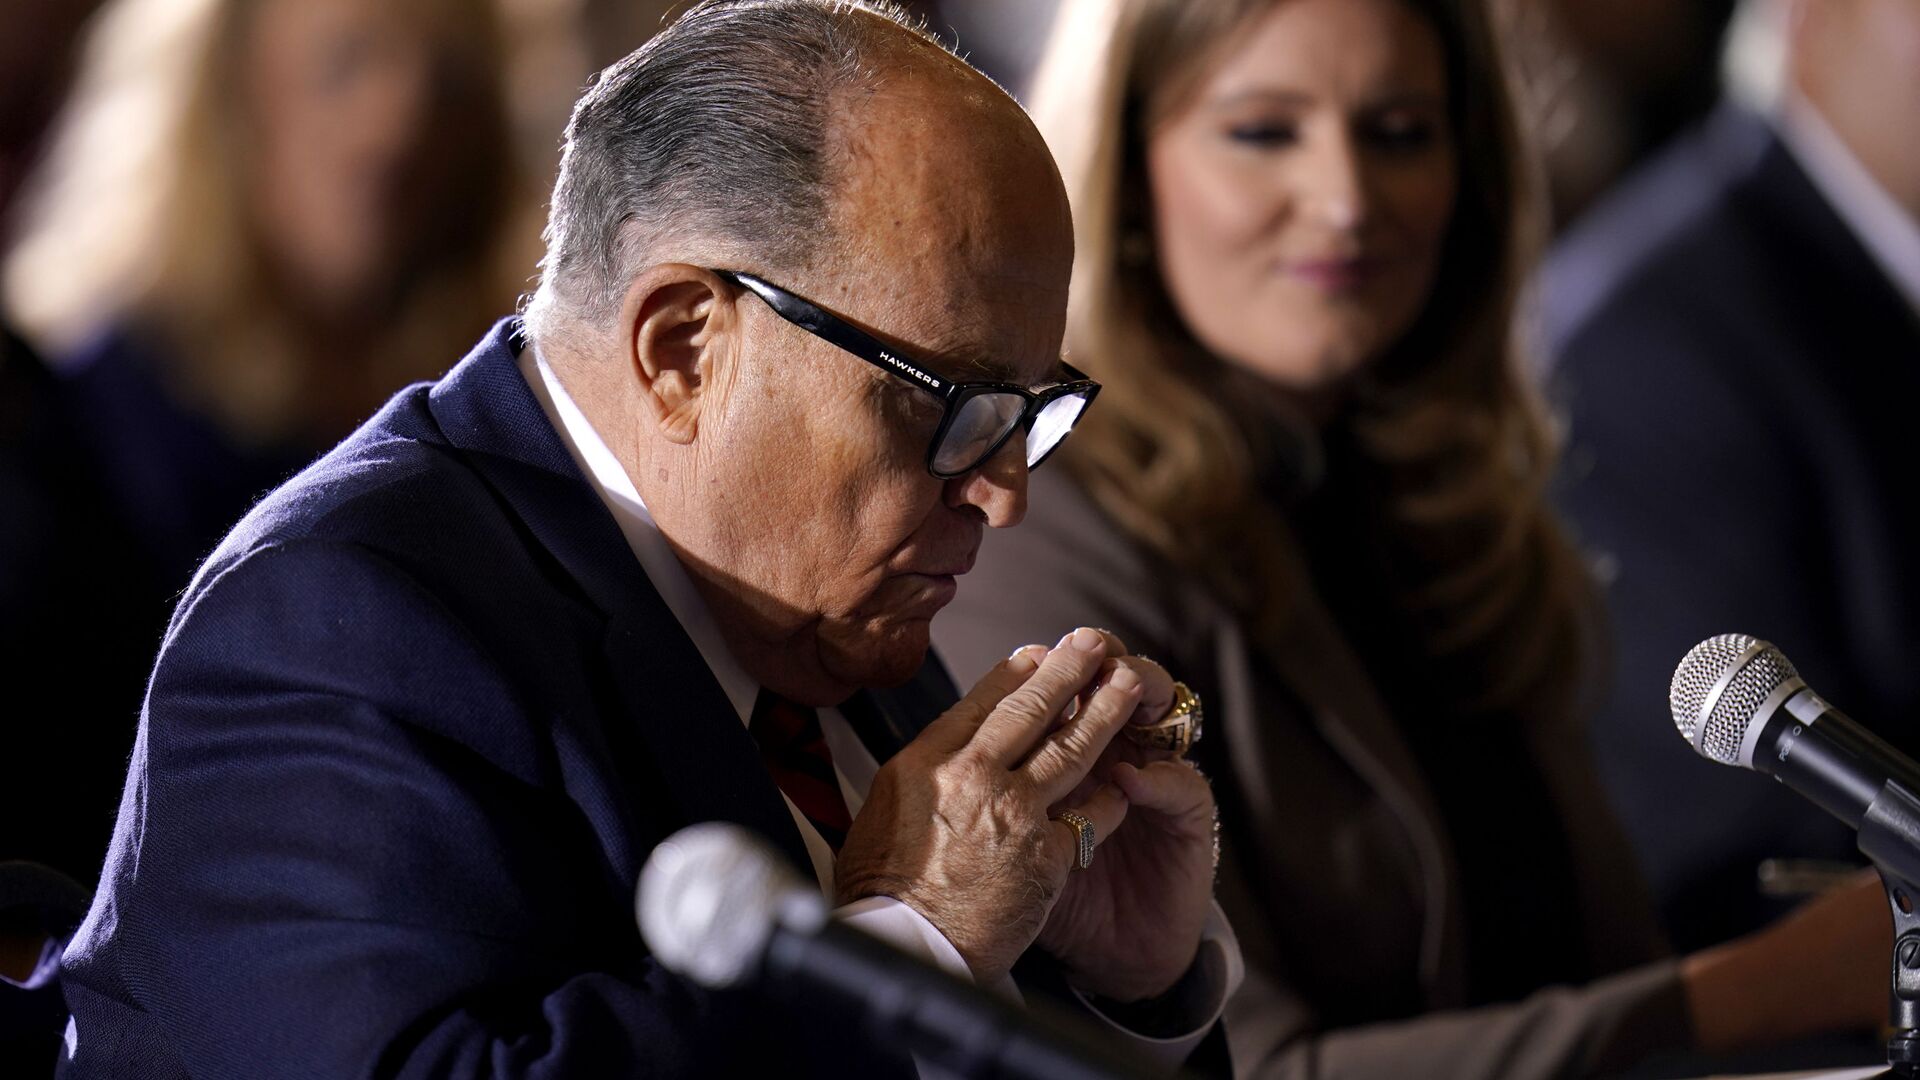 Former Mayor of New York Rudy Giuliani, a lawyer for President Donald Trump, speaks at a hearing of the Pennsylvania State Senate Majority Policy Committee, Wednesday, Nov. 25, 2020, in Gettysburg, Pa - Sputnik International, 1920, 24.06.2021